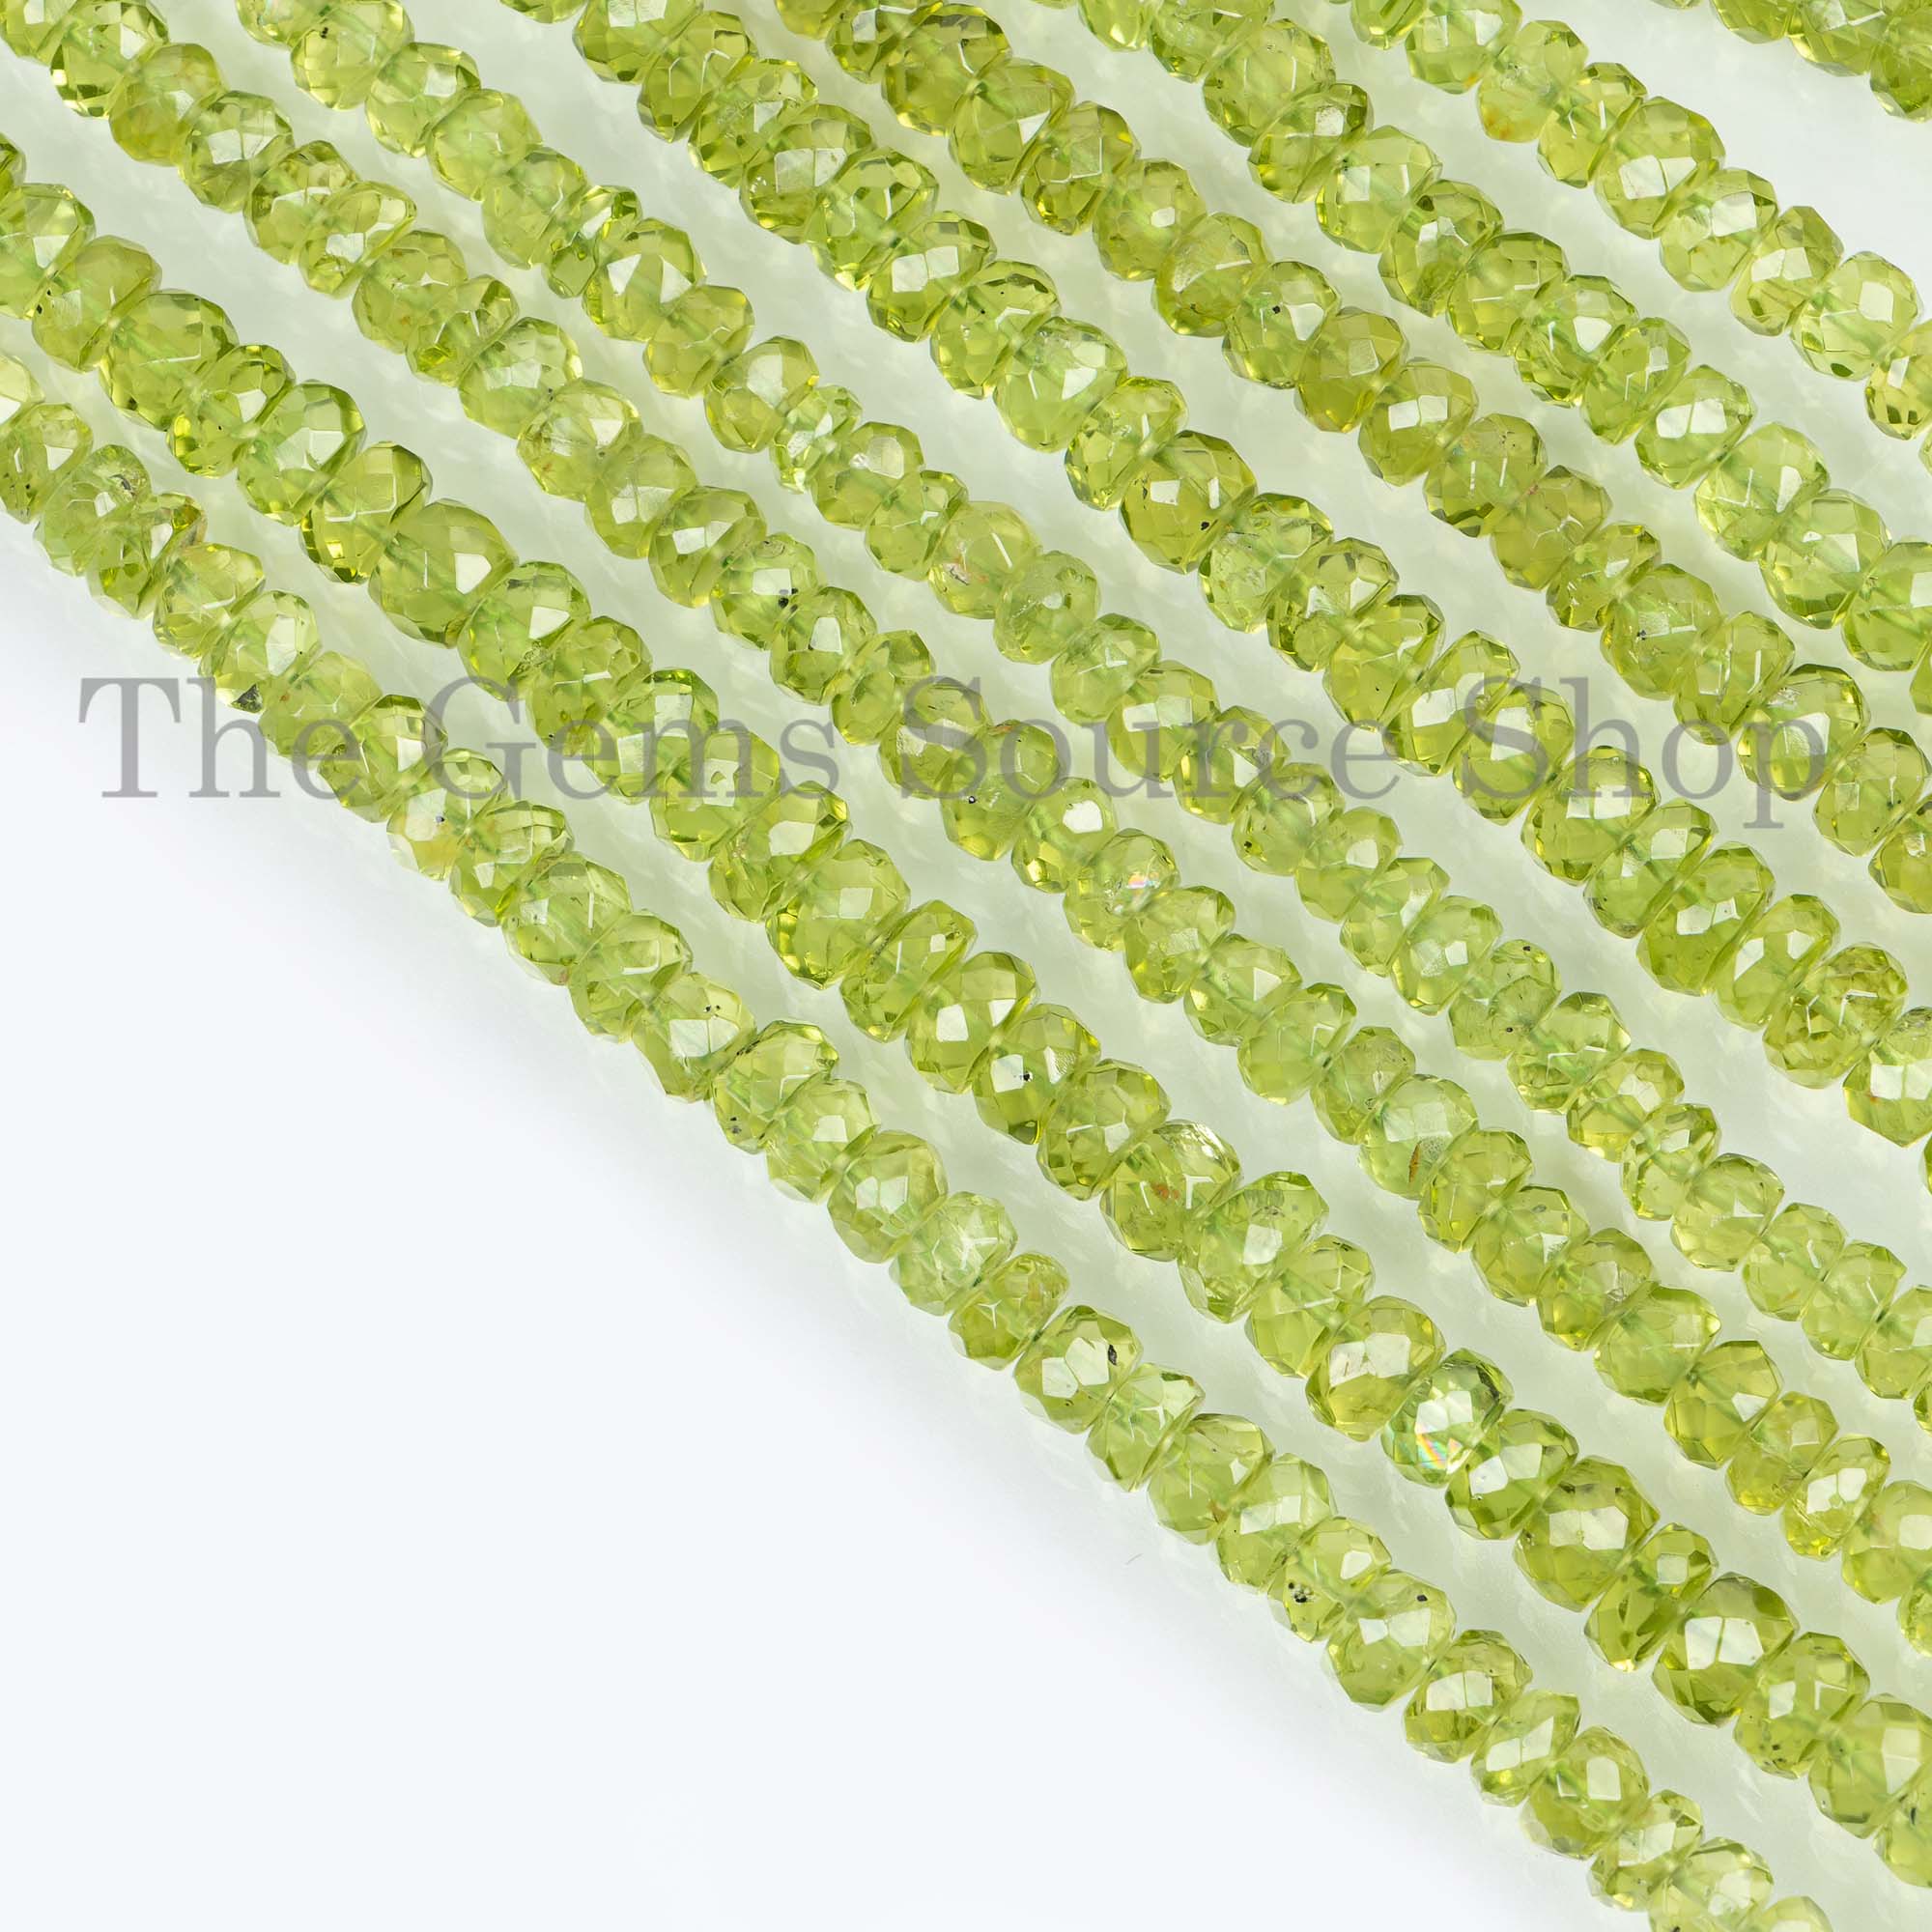 Natural Green Peridot Rondelle Faceted 5-6 mm Loose Beads, TGS-4245